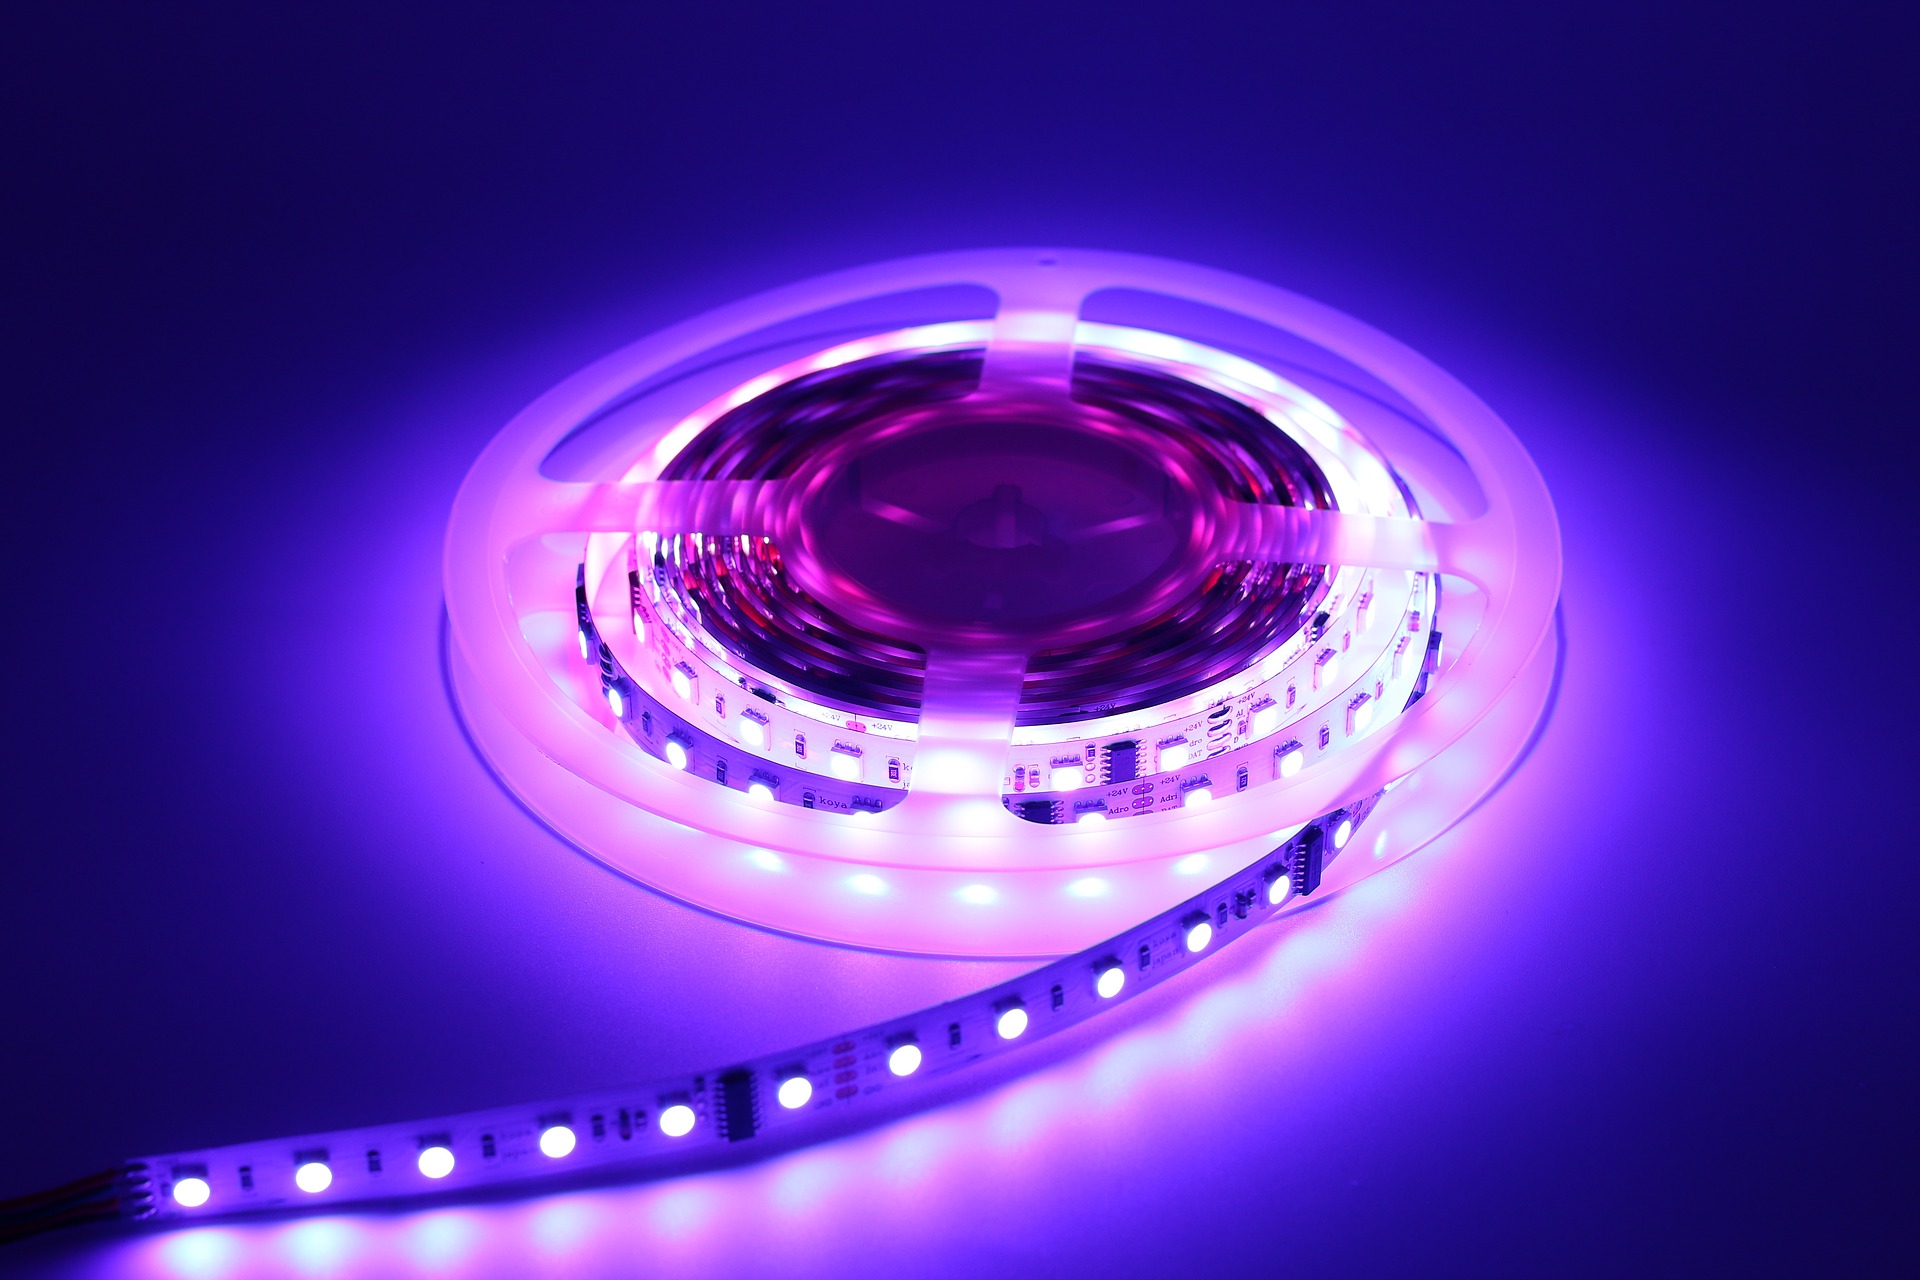 Global LED Companies Launch UVC LED Products to Meet Growing Demands -